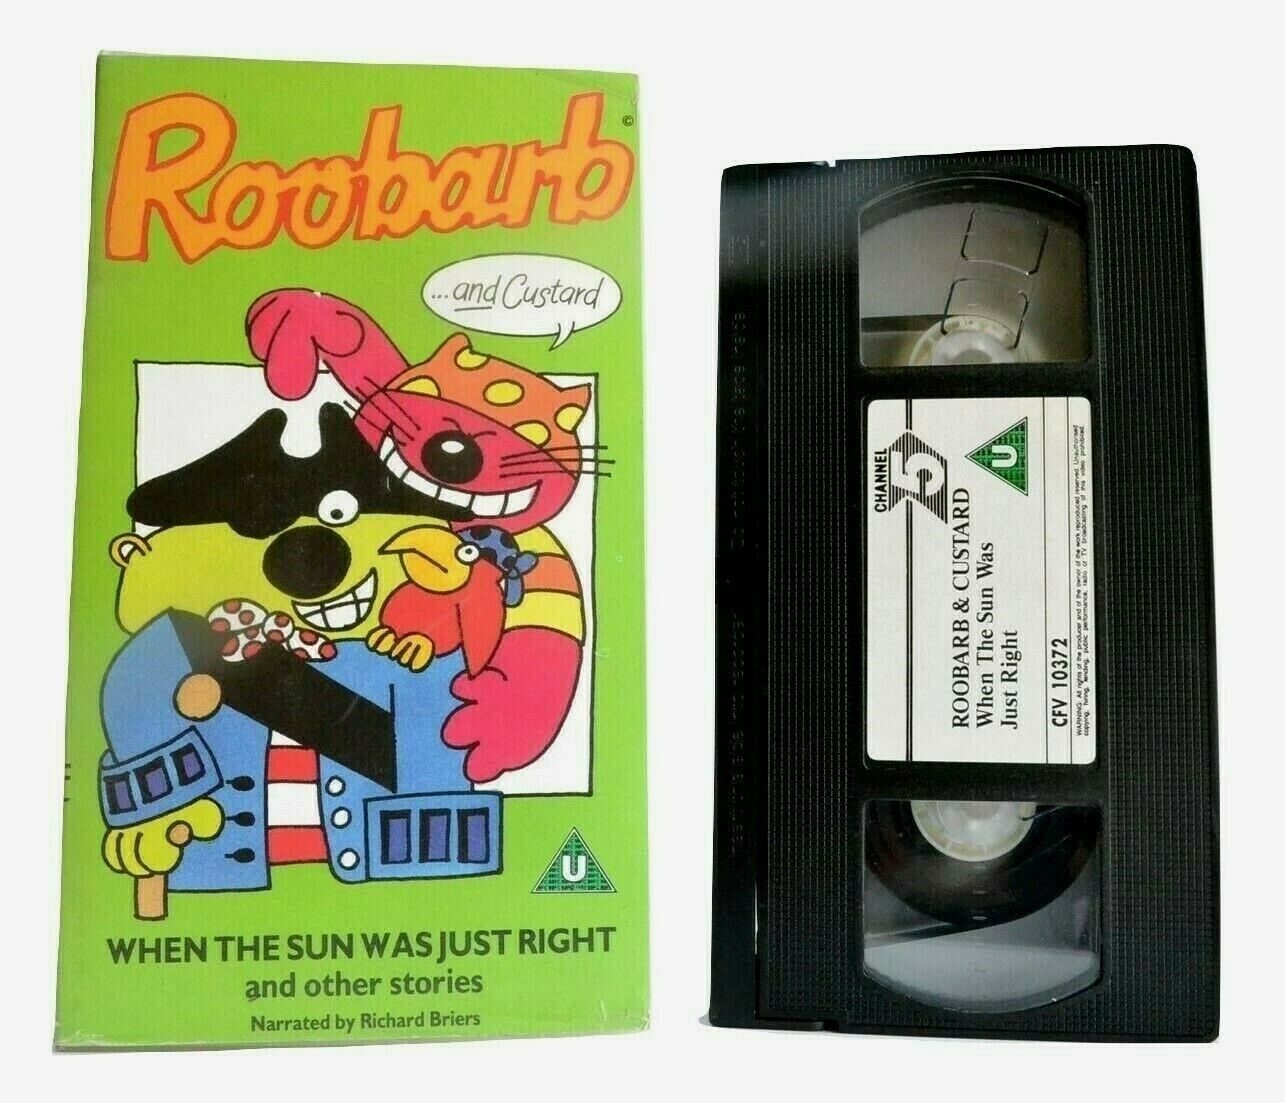 Roobarb And Custard: When The Sun Was Just Right - Animated - Children's - VHS